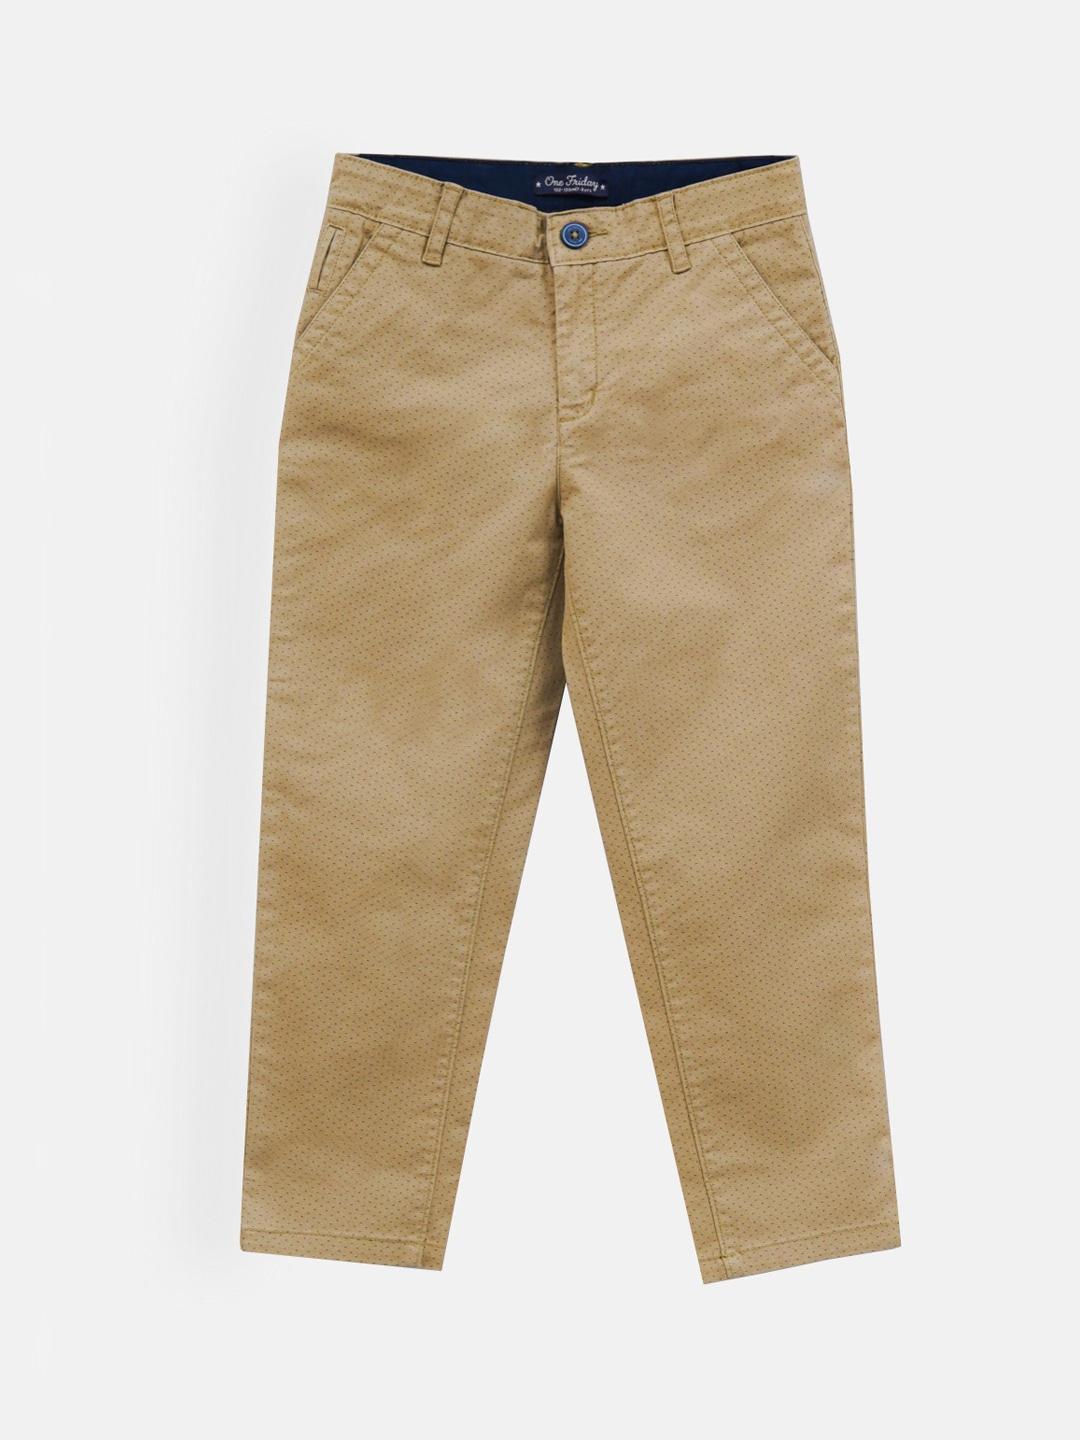 One Friday Boys Mustard Yellow Relaxed Chinos Trousers